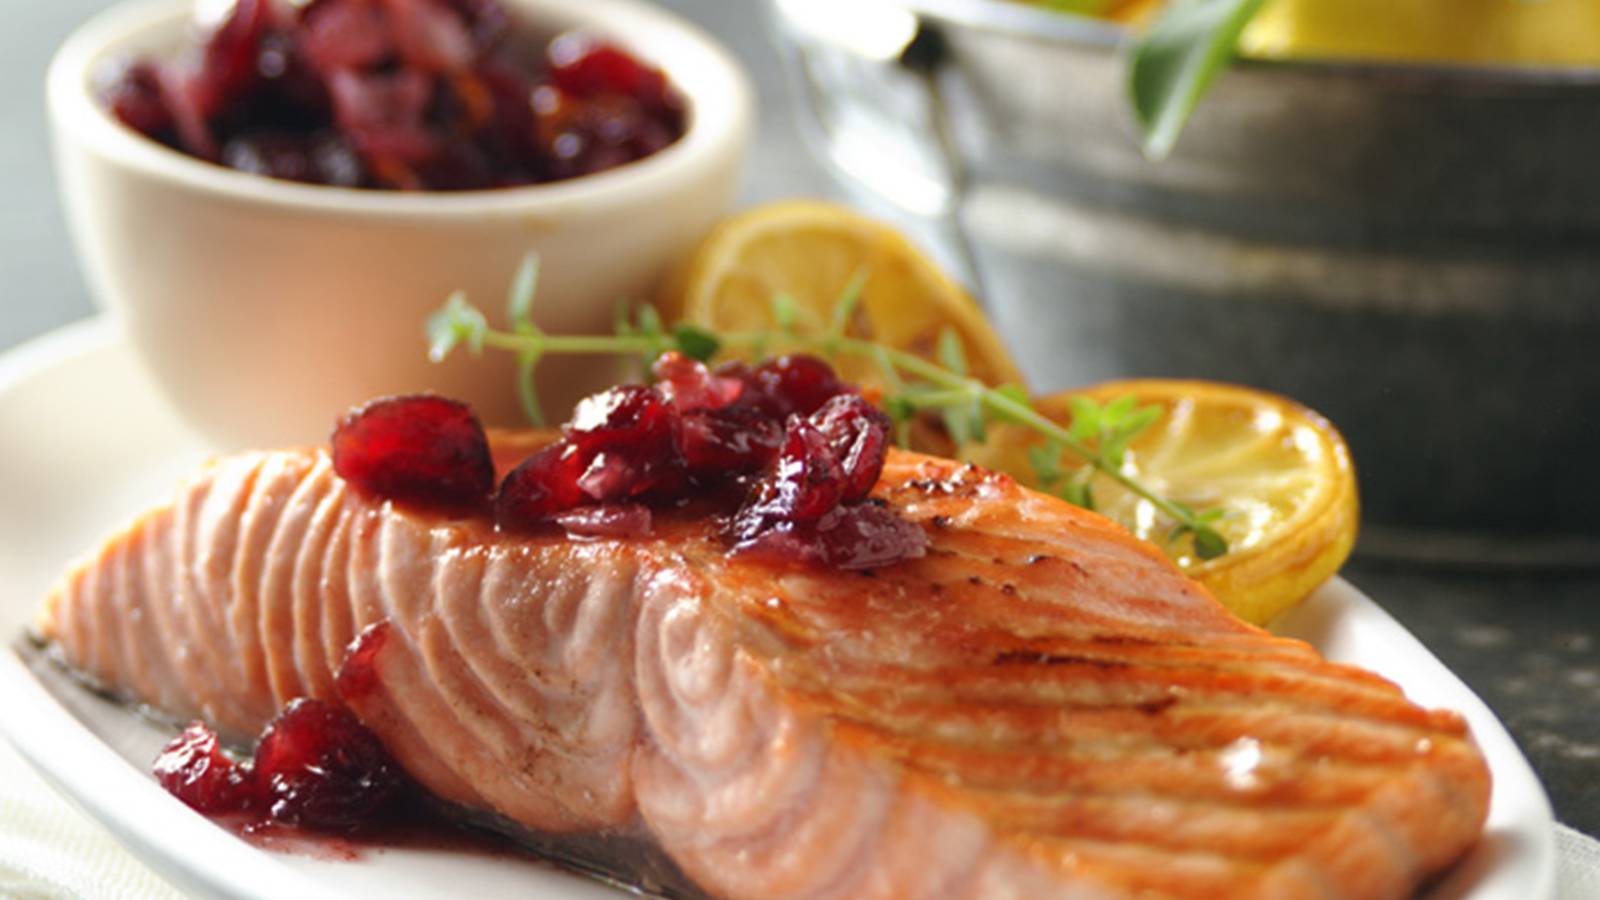 Conceiving-Why-cranberries-are-a-fertility-superfood-cedar-planked-salmon